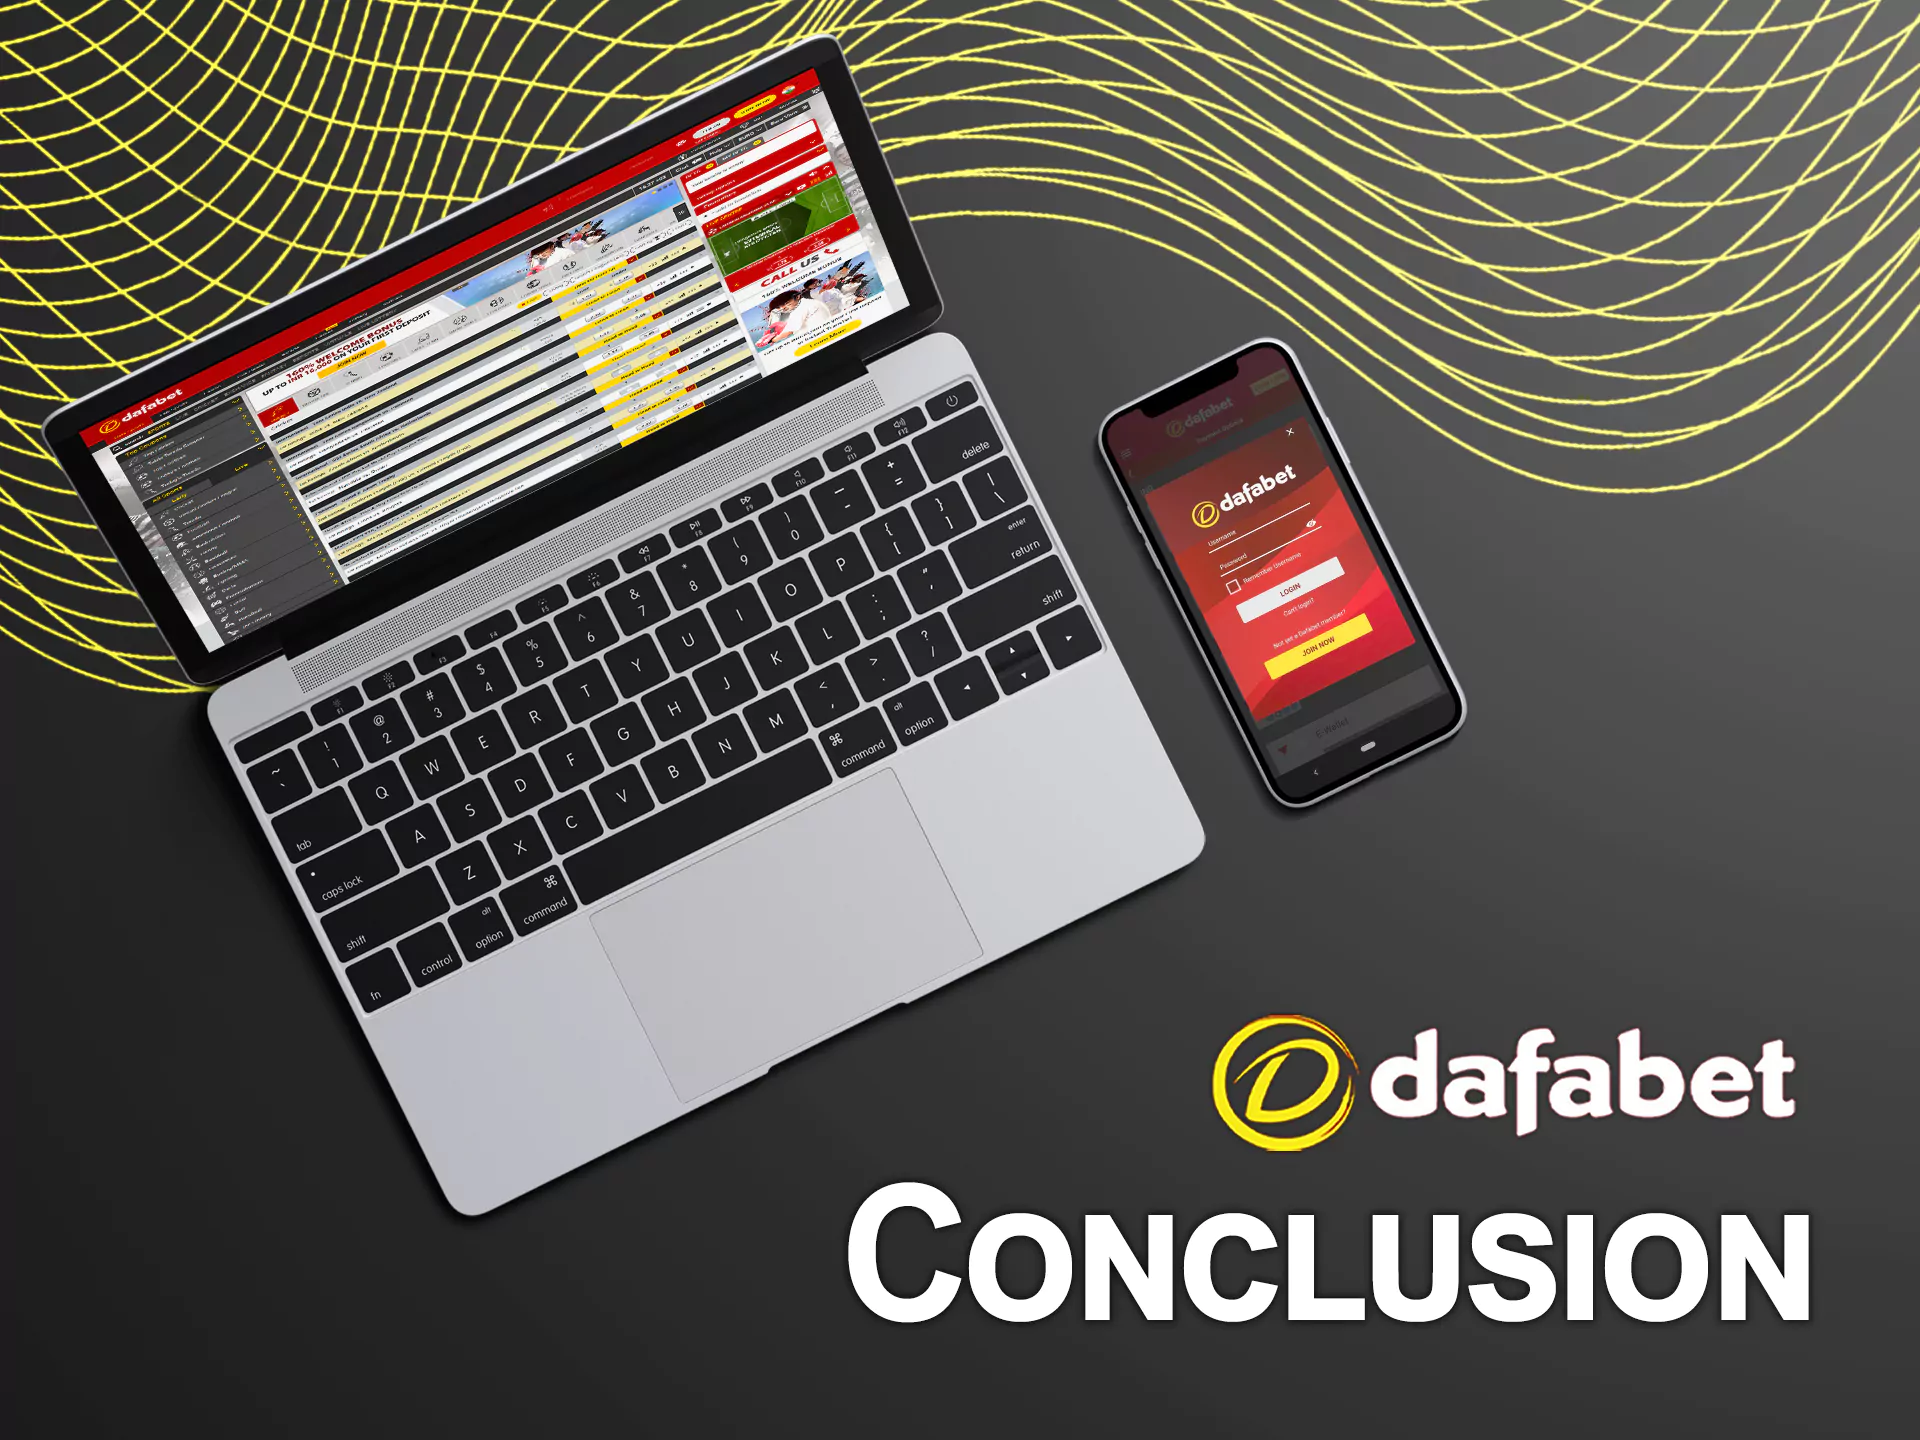 Dafabet provides great options for betting on cricket and other sports events.